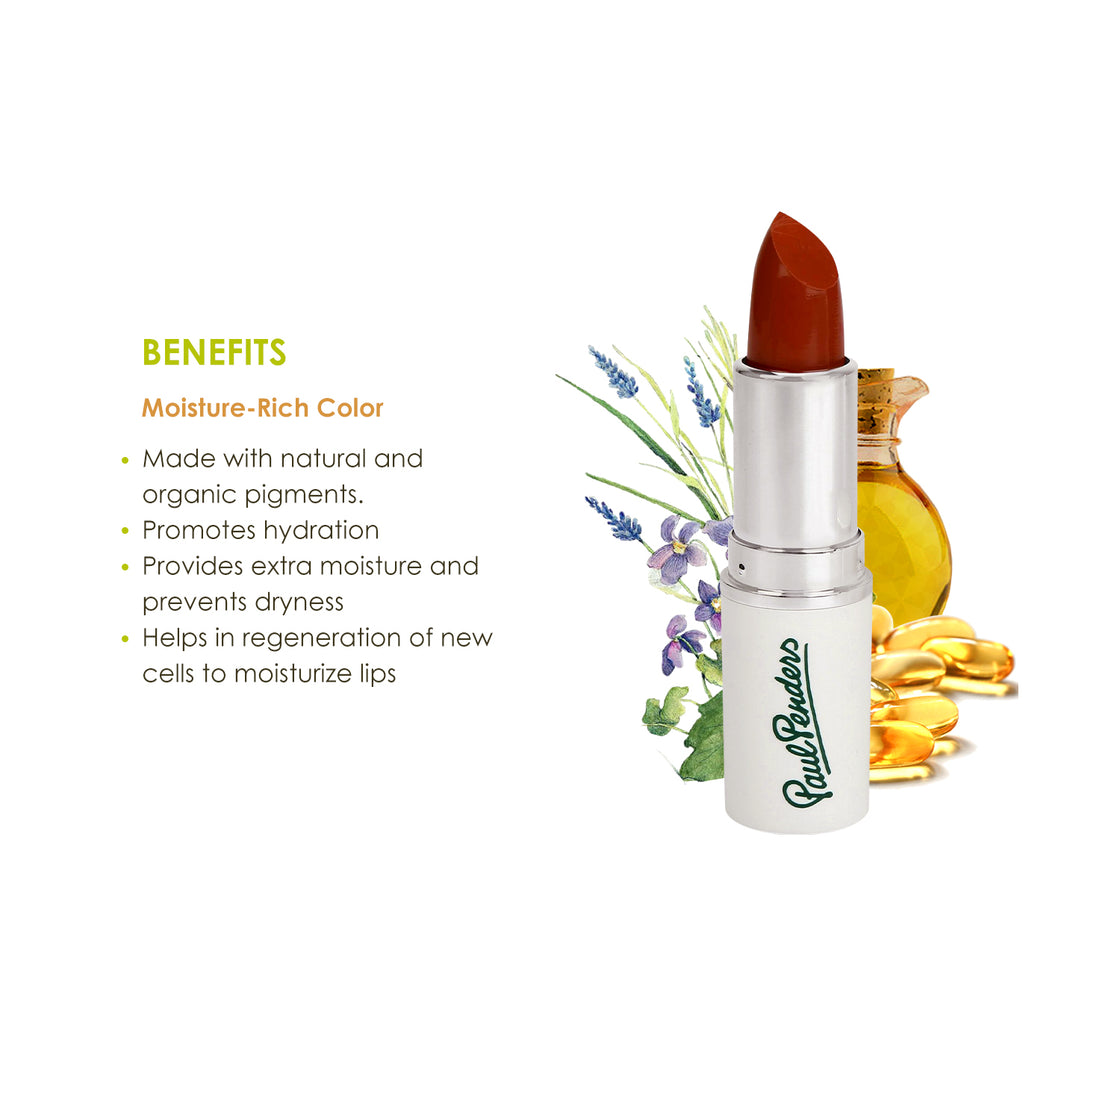 Paul Penders Hand Made Natural Cream Lipstick For A Natural Look | Moisture Rich Colour